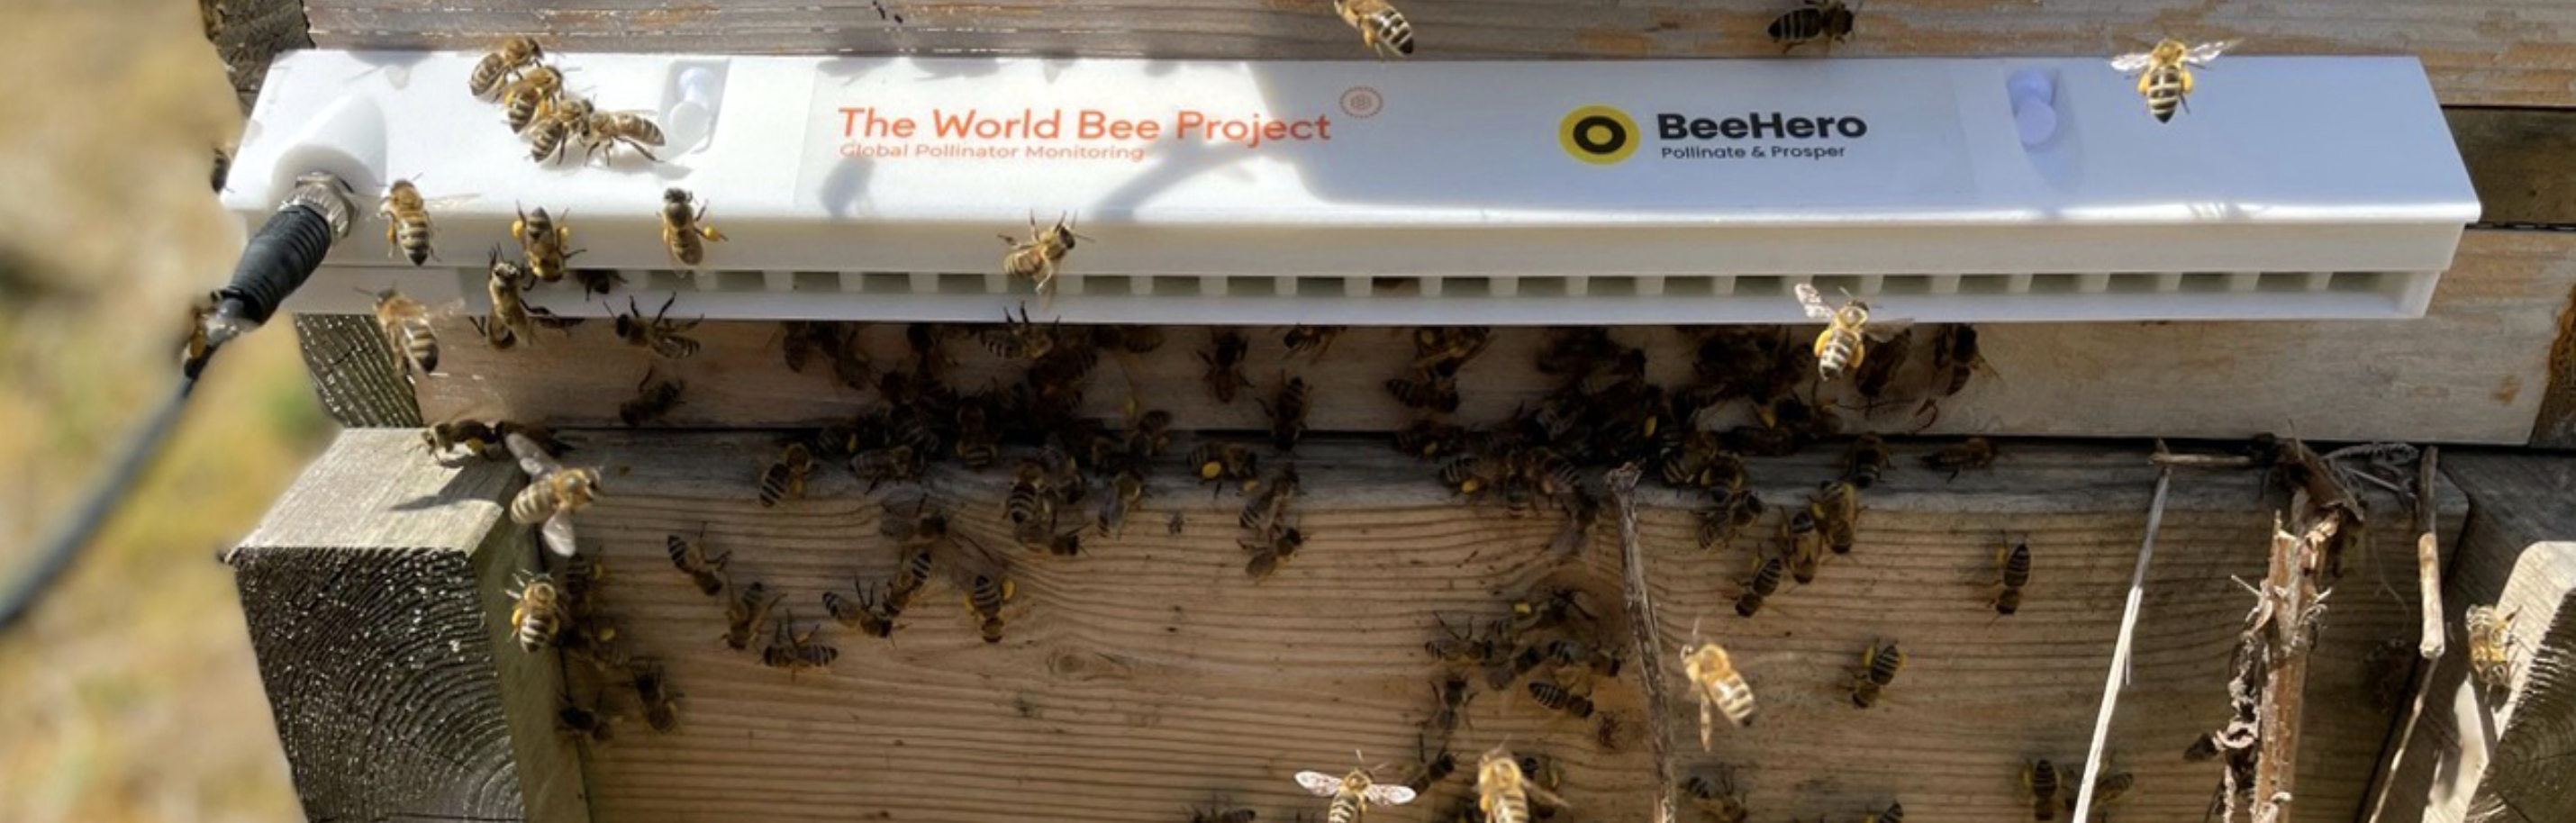 How Artificial Intelligence, IoT And Big Data Can Save The Bees